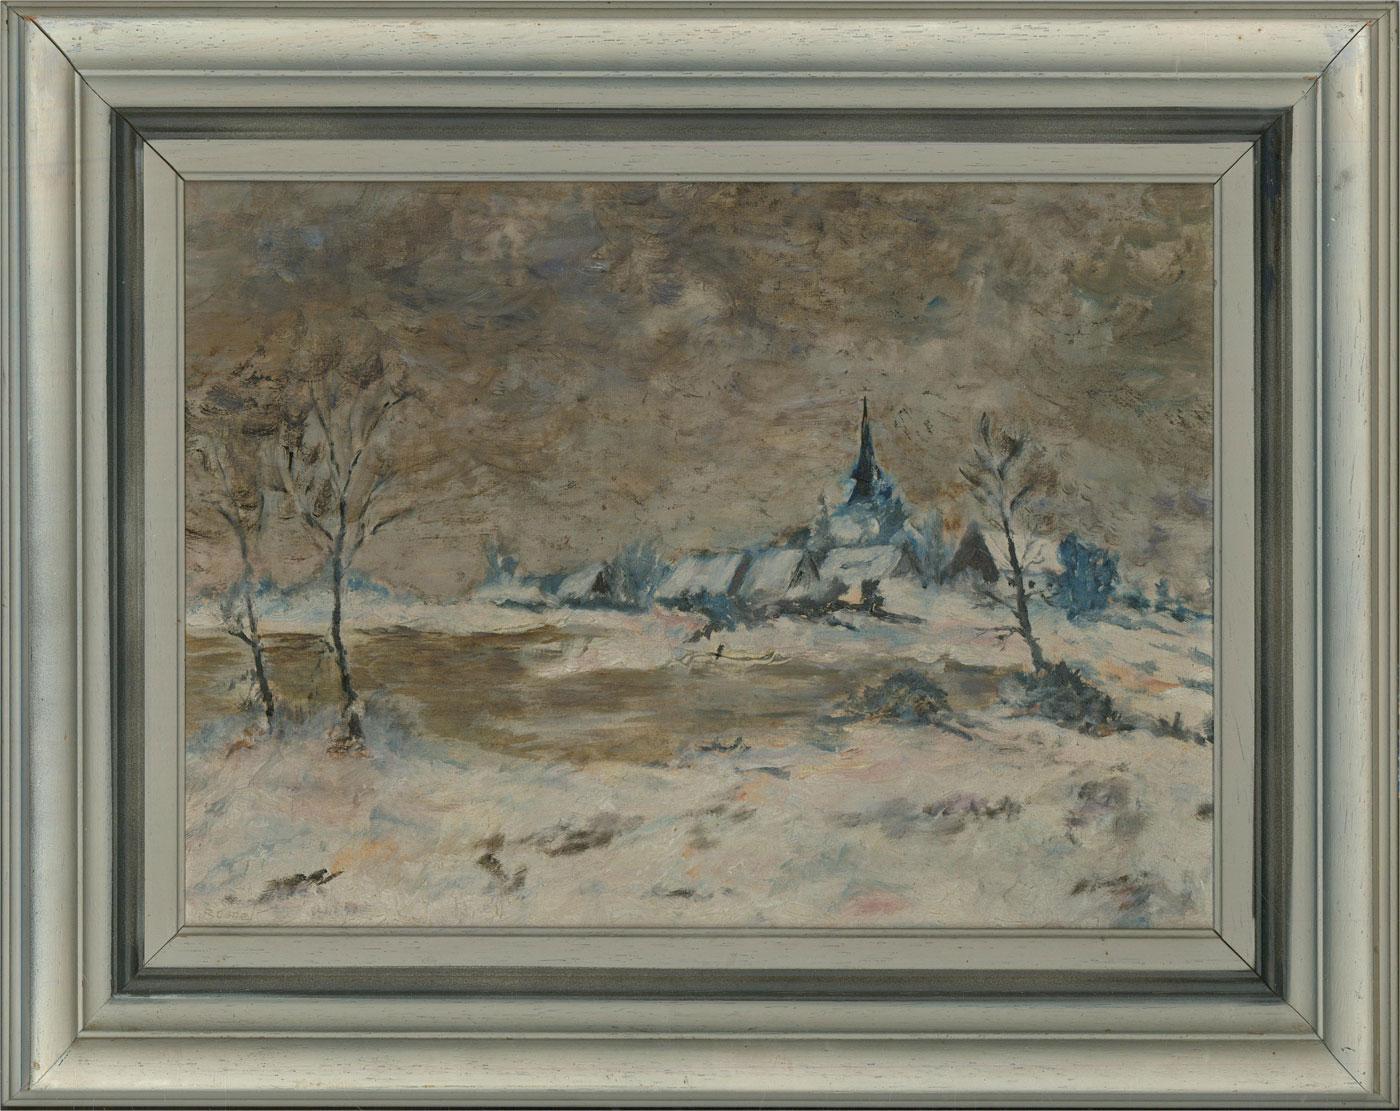 A captivating oil painting, depicting a wintry landscape scene with a village in the distance. Signed to the lower left-hand corner. Well-presented in an off-white wooden frame with a dark grey detail, as shown. On canvas on stretchers.
